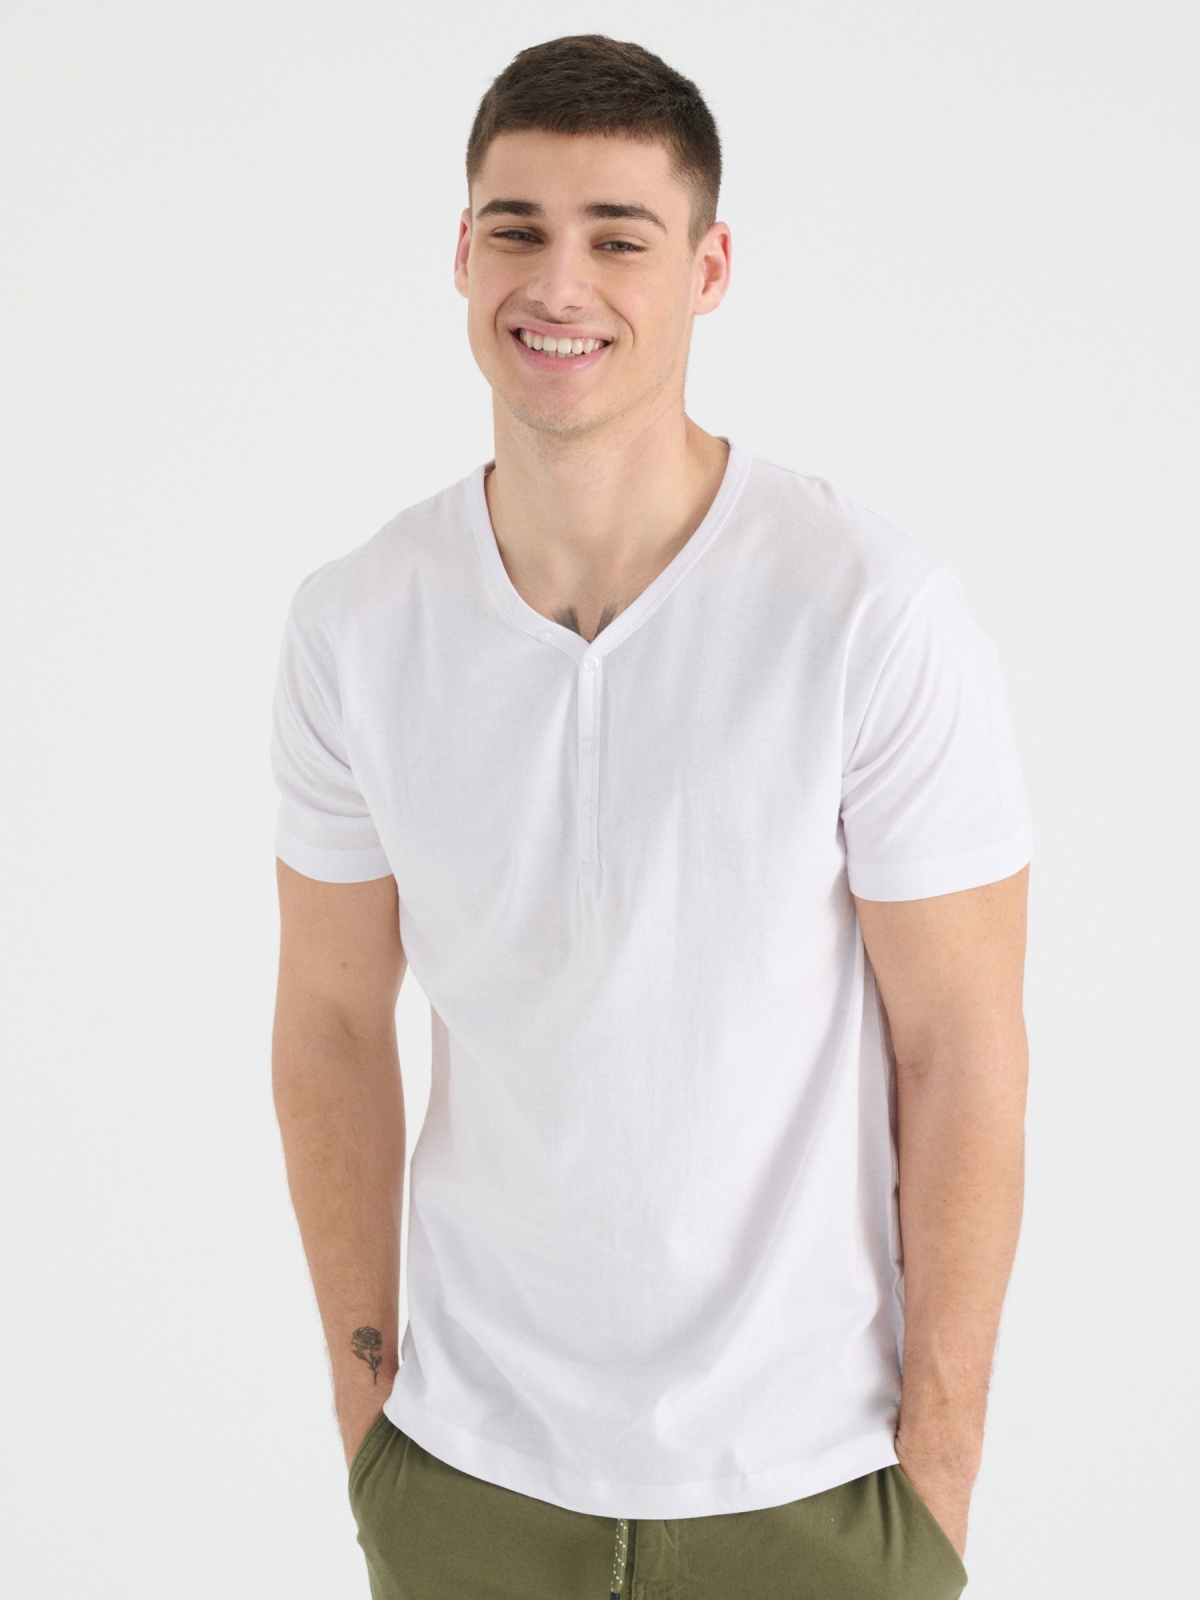 Buttons neck t-shirt white middle front view